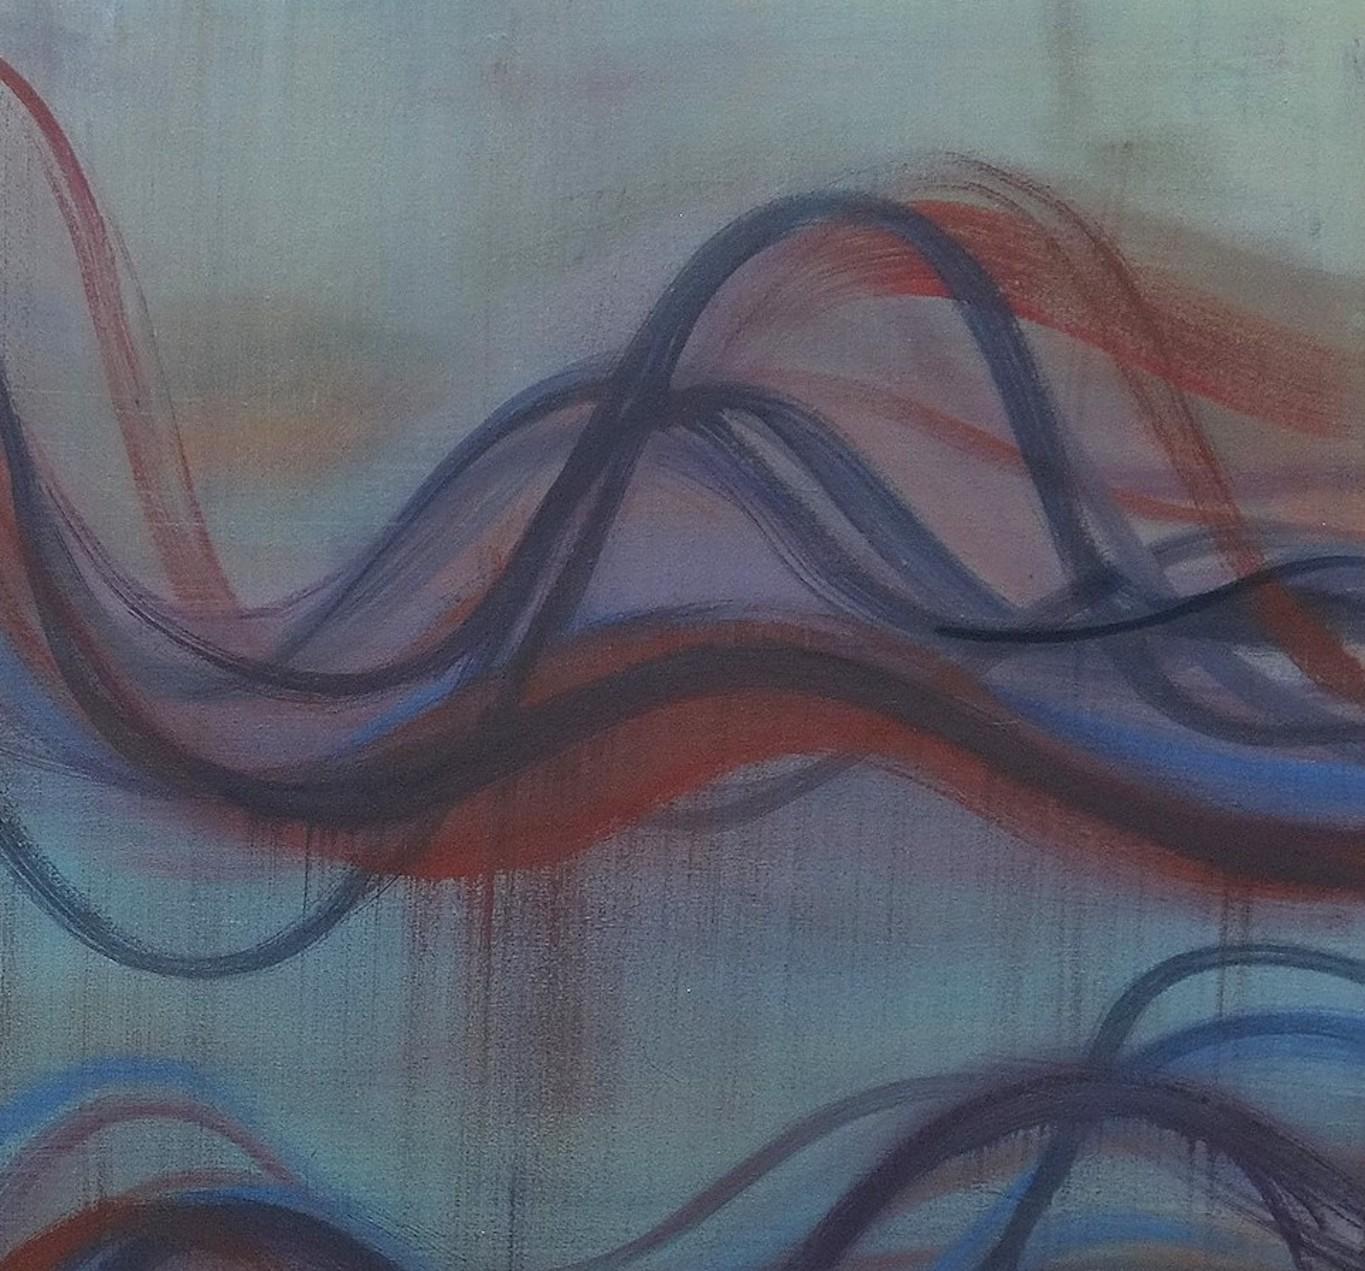 Within undulating lines in shades of blue with hints of pale pink and dark red, Margaret Neill investigates the properties of abstract curvilinear forms found in the localized conditions of her surrounding environment. This experience is sublimated